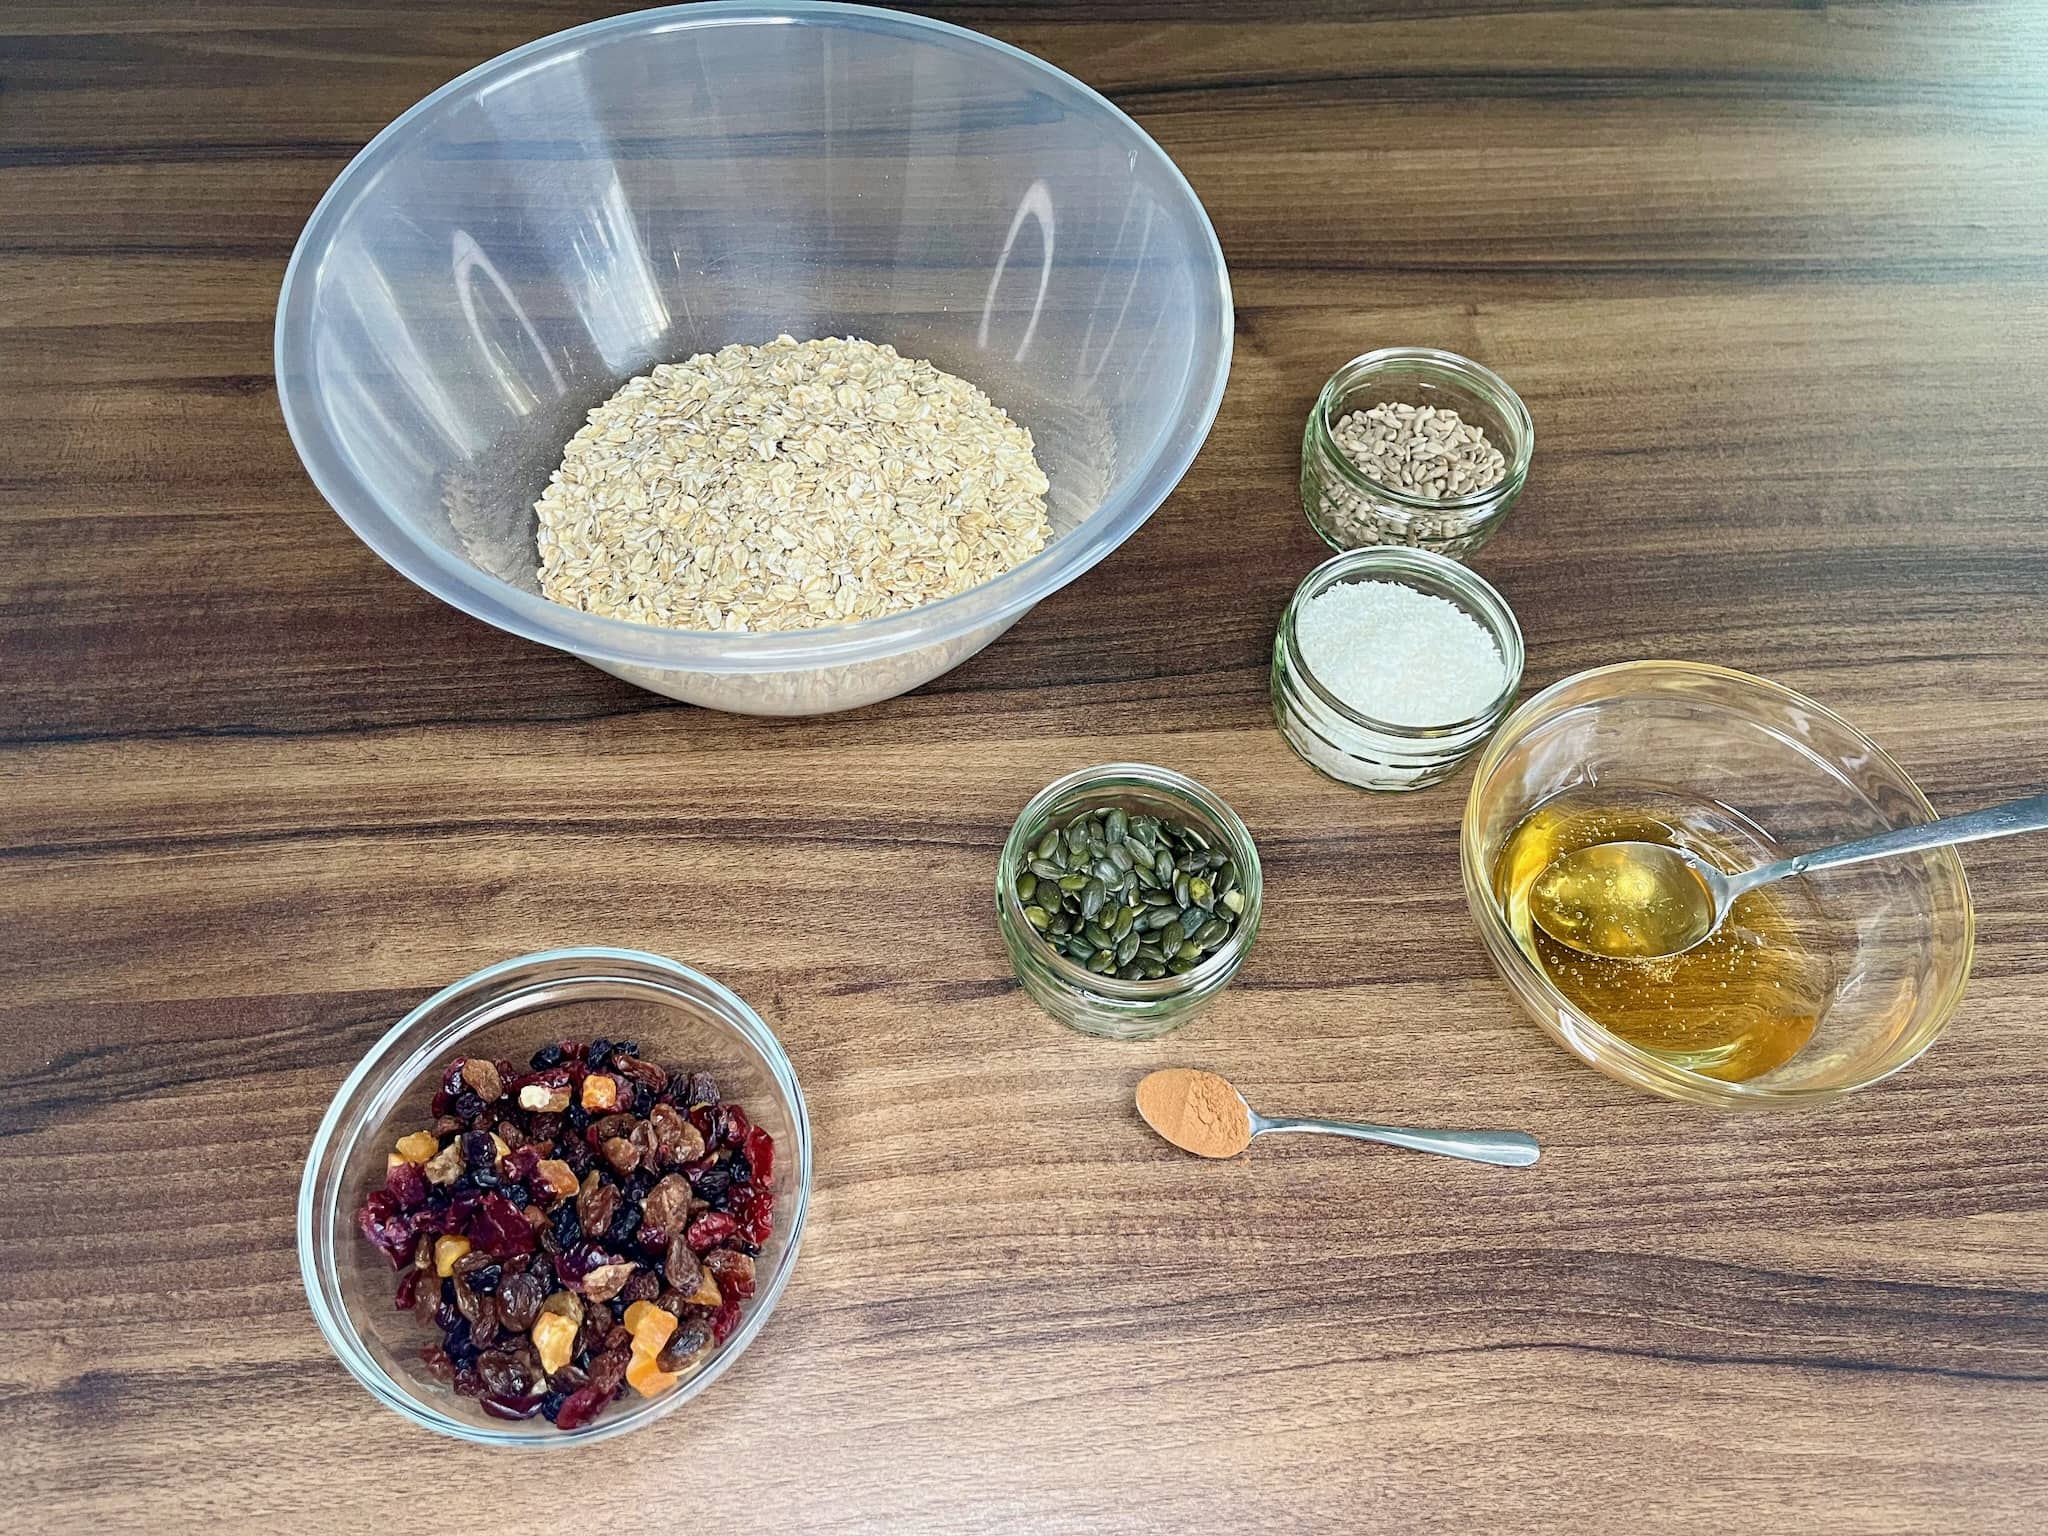 All the ingredients ready to make nut-free homemade granola